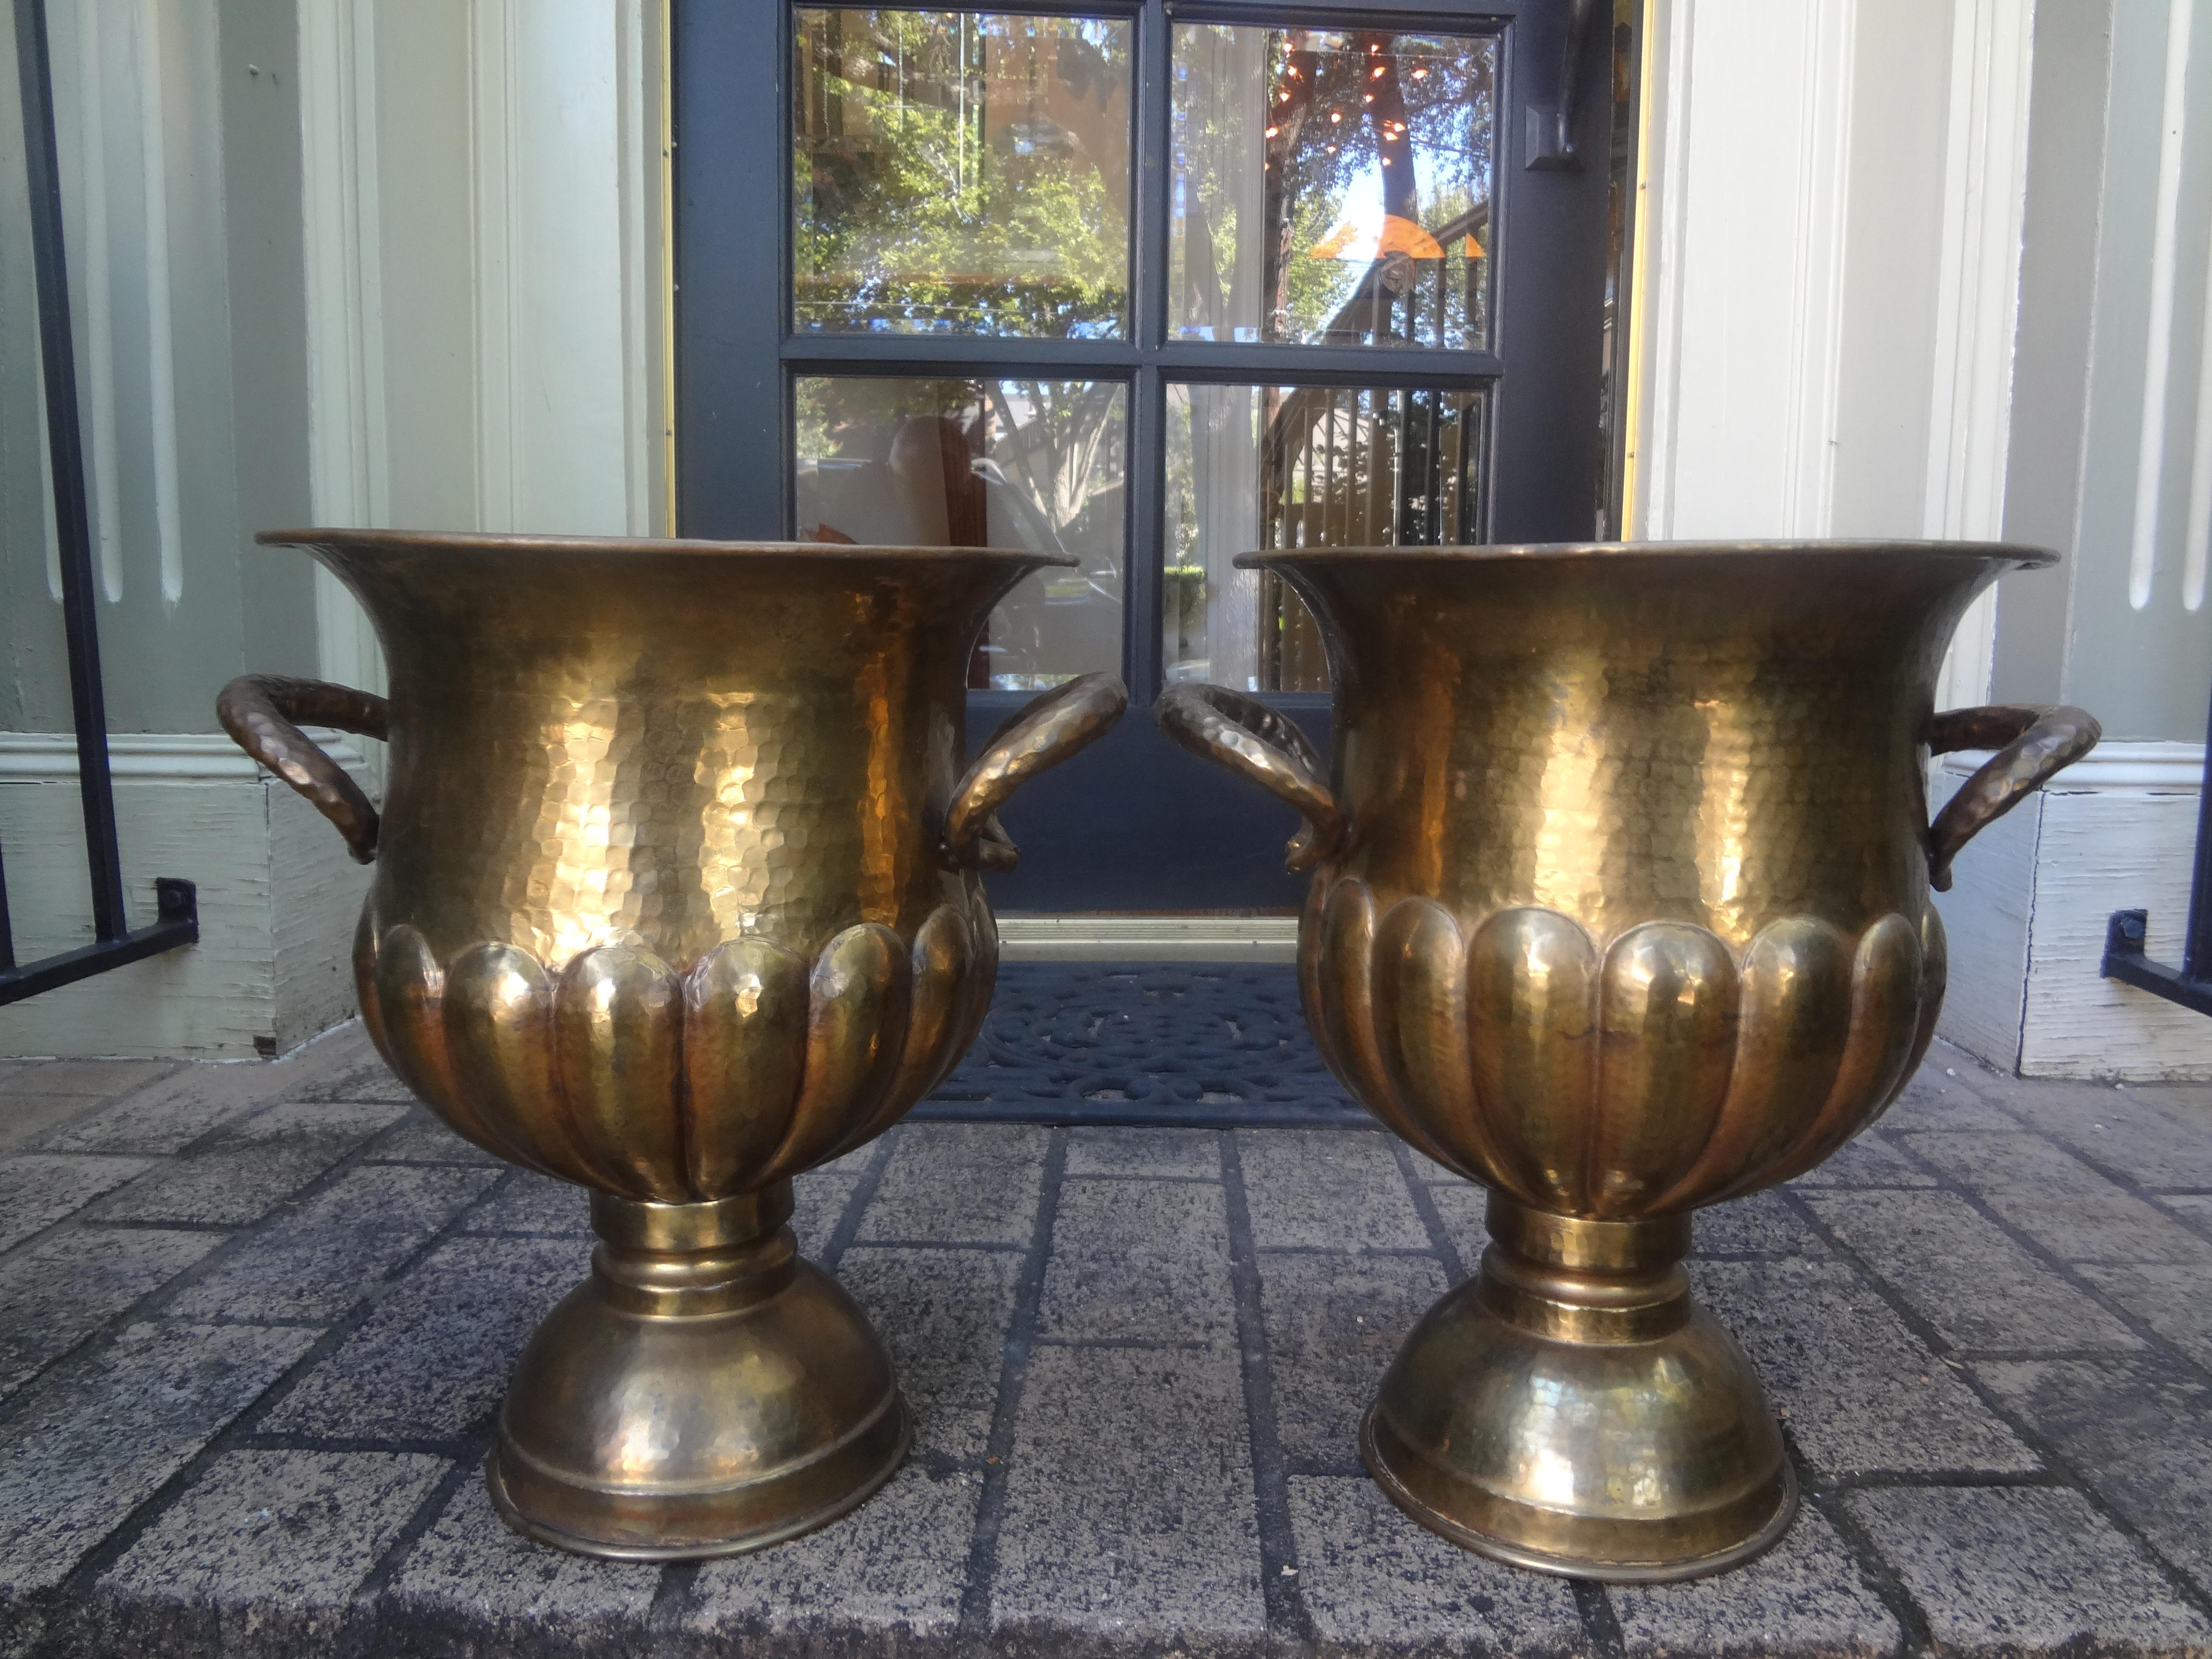 Pair Of Vintage Italian Brass Wine Or Champagne Coolers.
This pair of Italian brass wine or champagne coolers or urns with hammered brass handles. 
in the manner of Egidio Casagrande would work as planters or jardinieres. Stamped Italy.
Great patina!